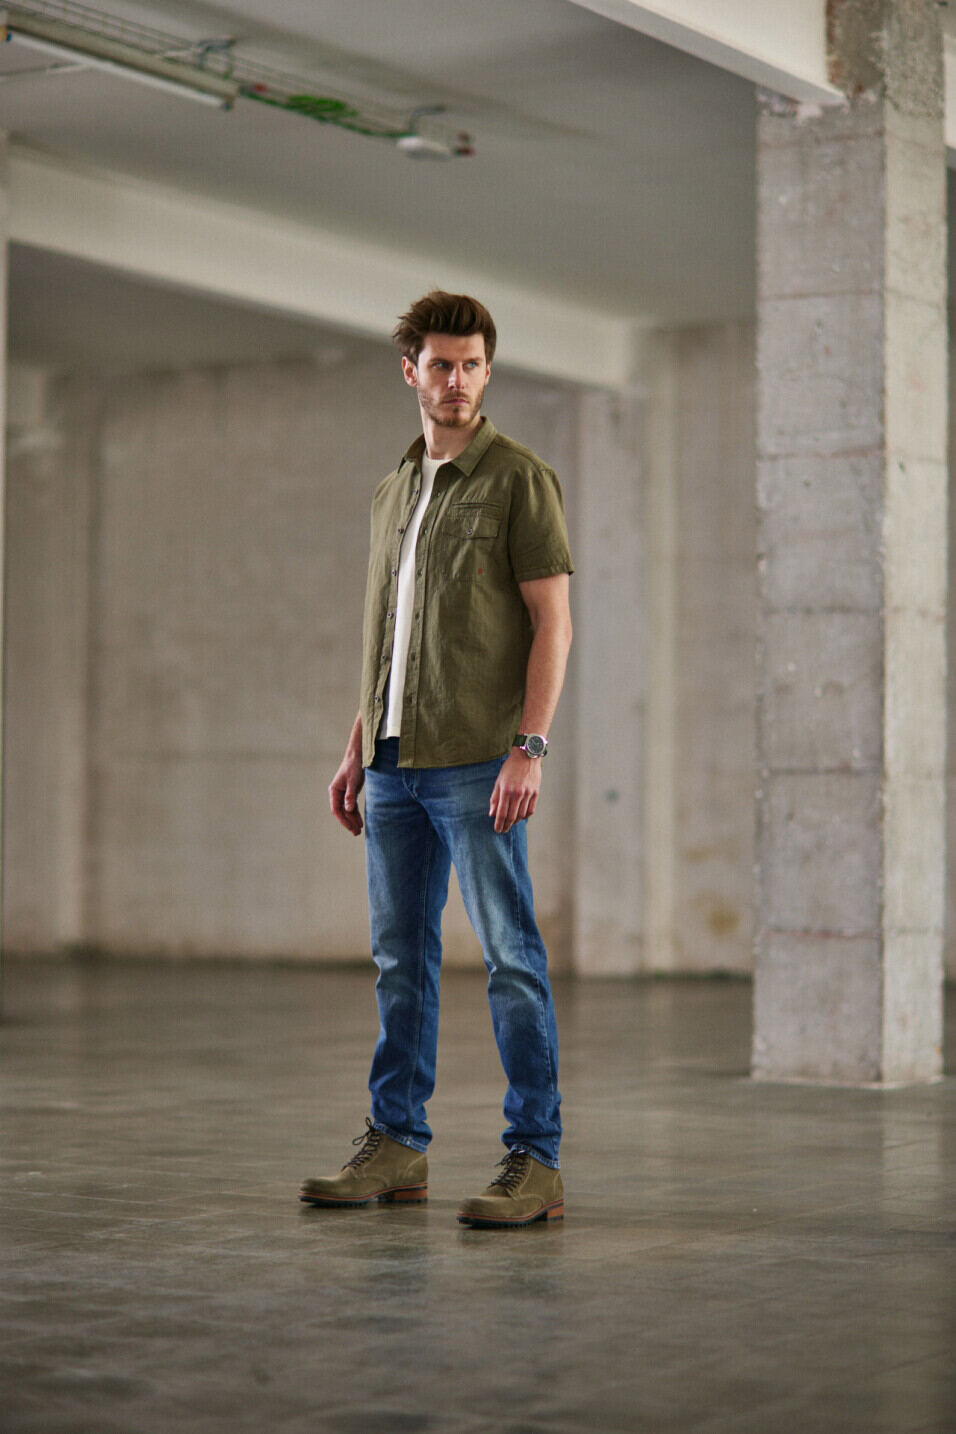 Chemise manches courtes Homme Joshua Washed Linen Dusty olive | Freeman T. Porter